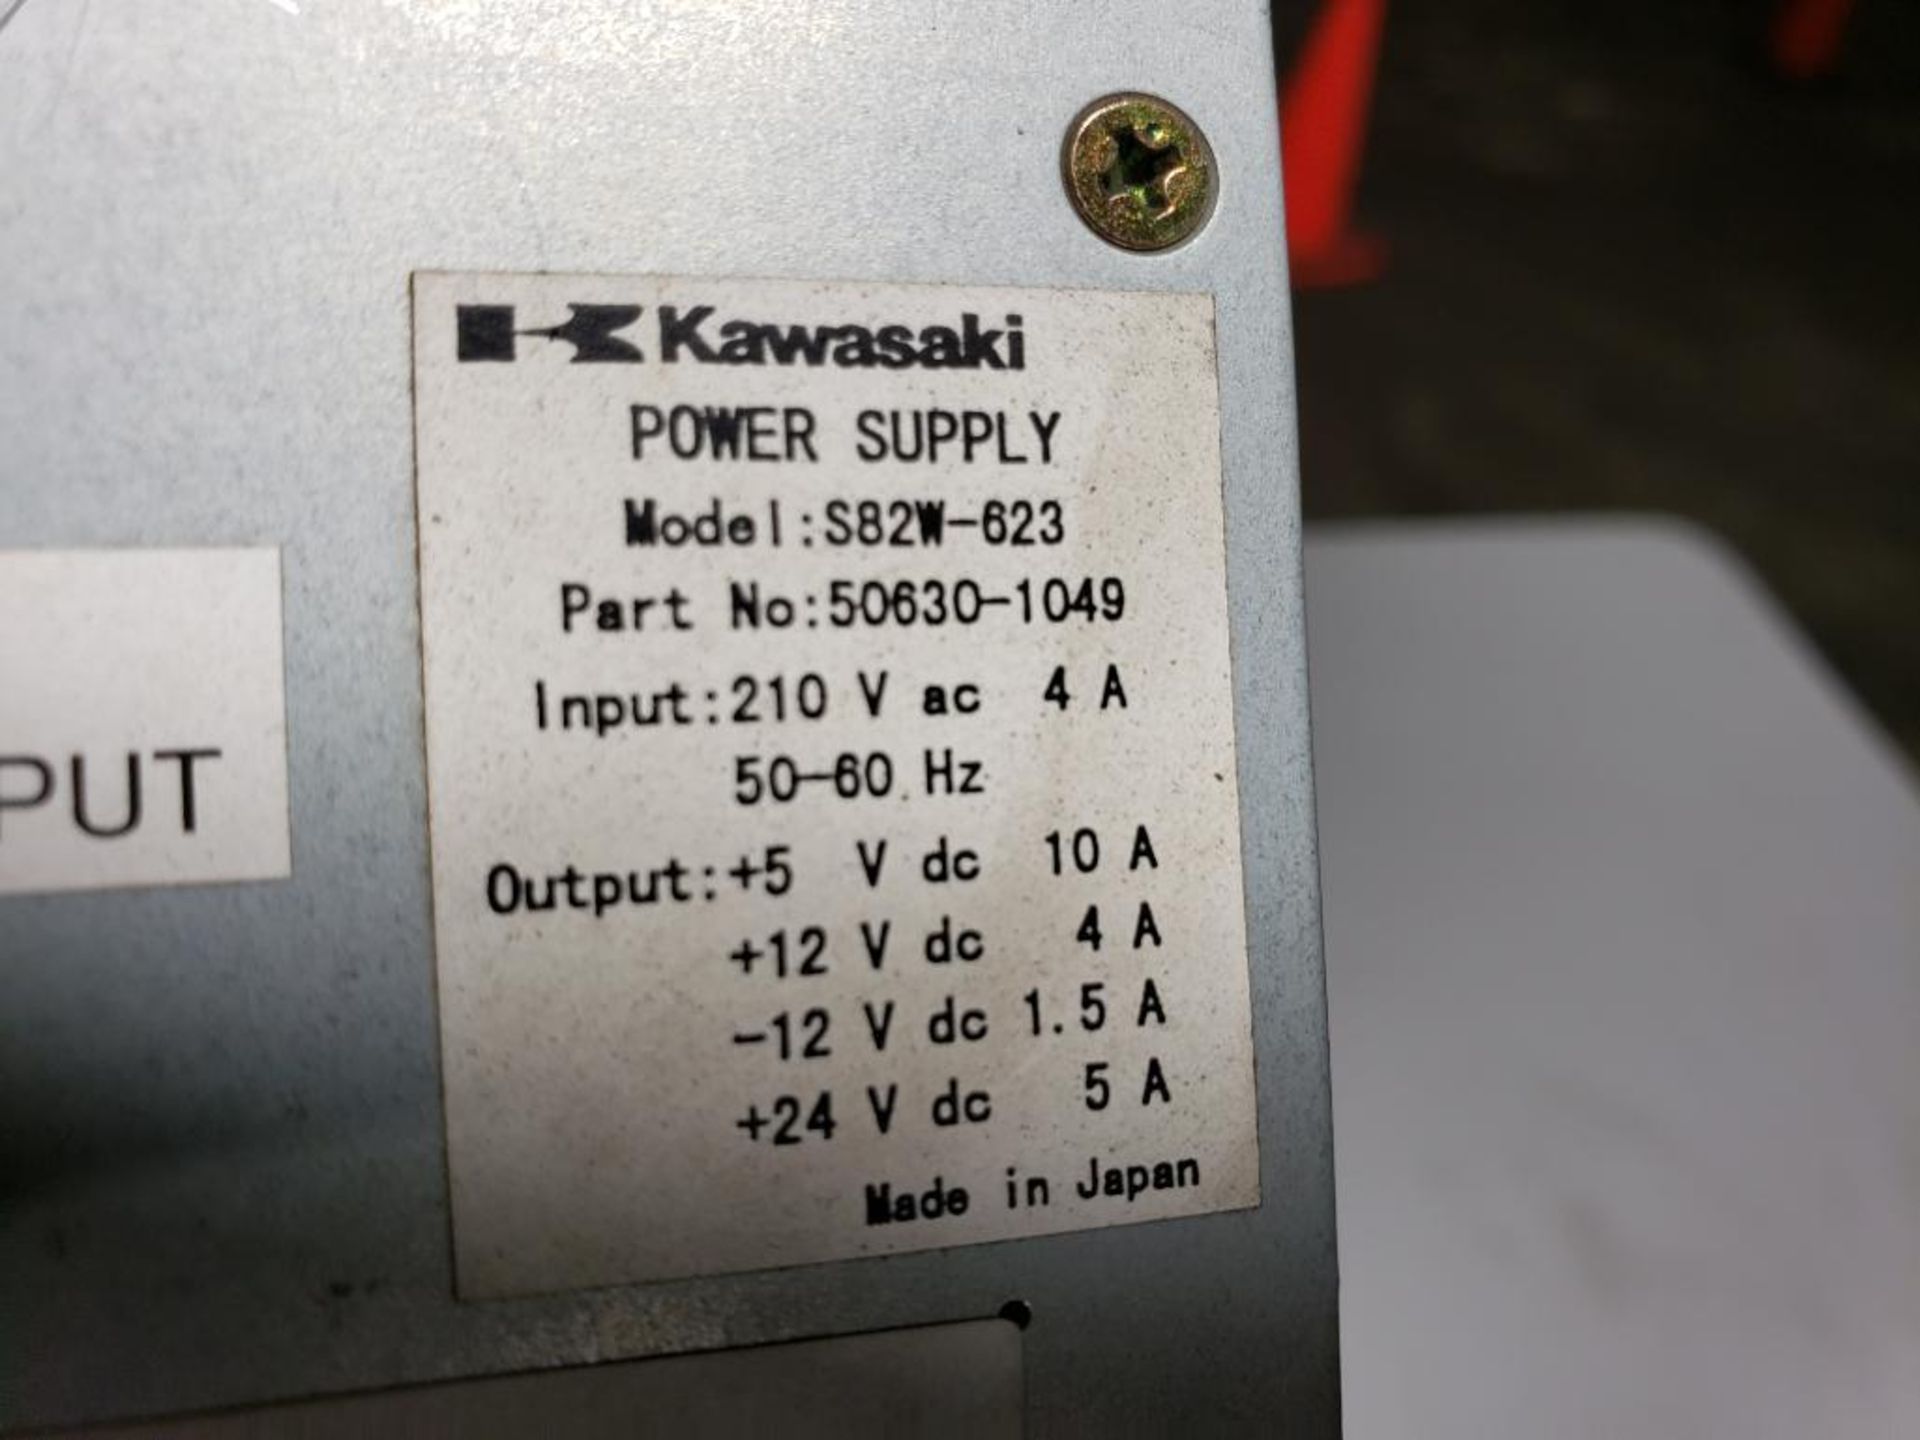 Kawasaki power supply and PLC. Model S82W-623. Part number 50630-1049. - Image 2 of 5